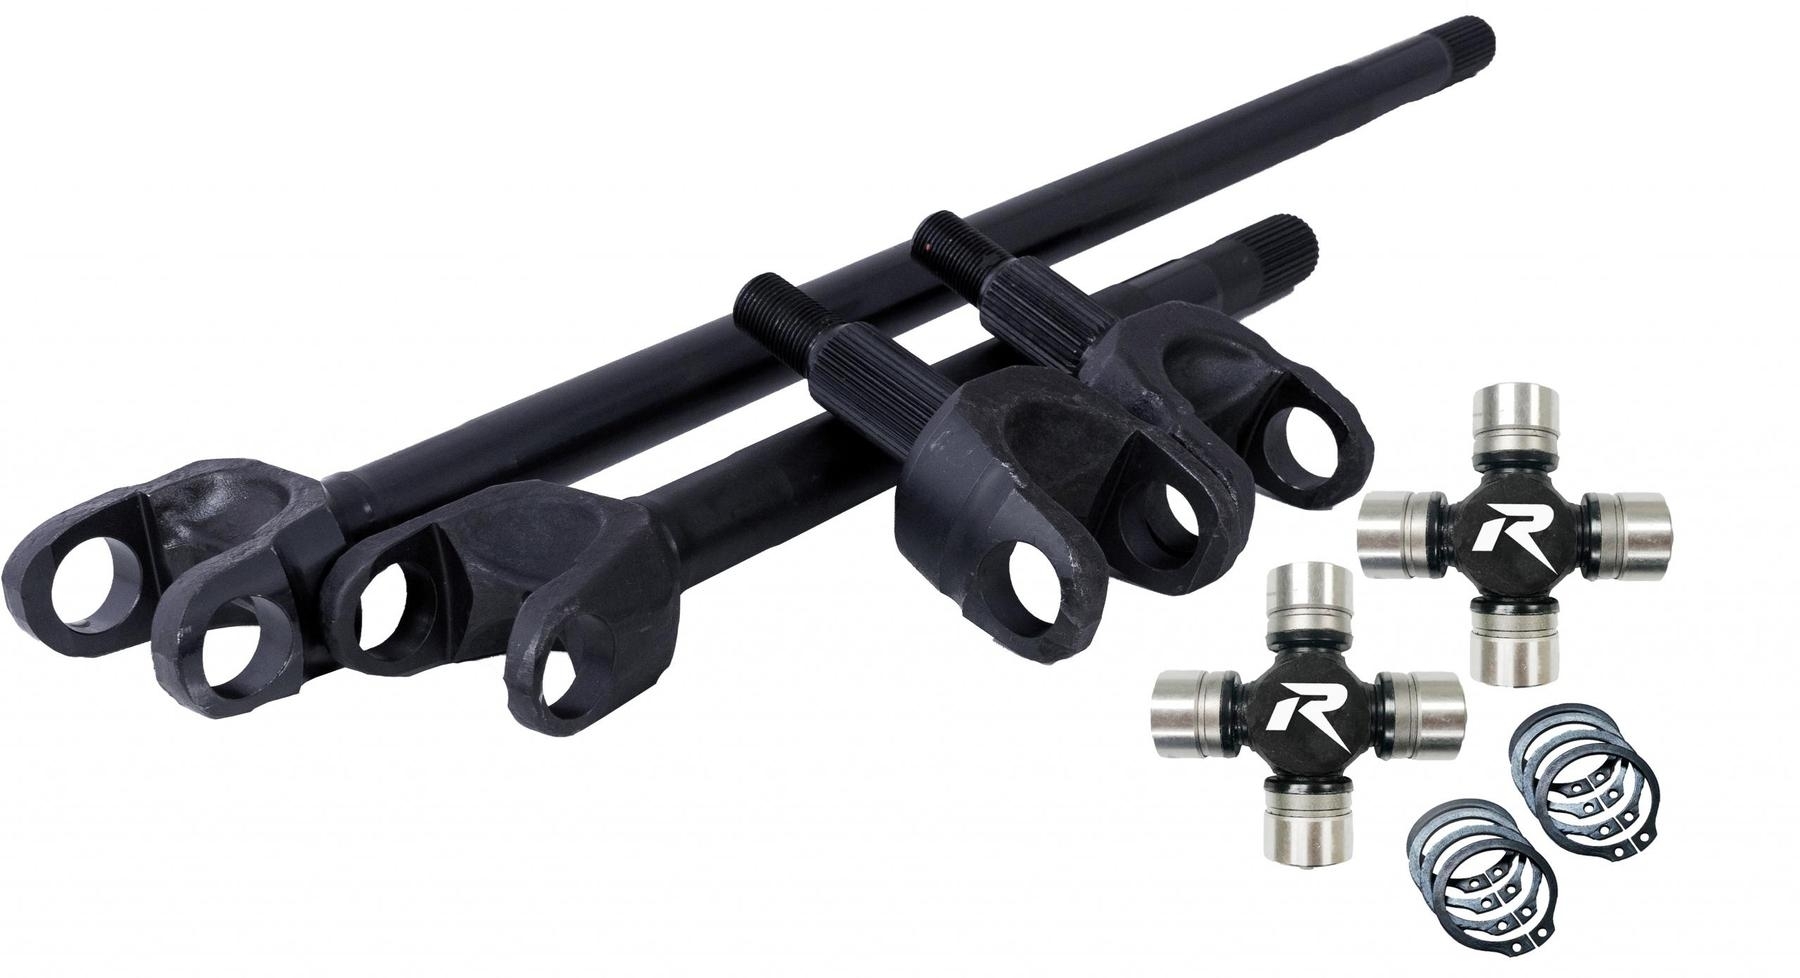 Revolution Gear & Axle Discovery Series 4340 Chromoly Front Axle Kit, Dana 44, Larger 1350 Style Hd